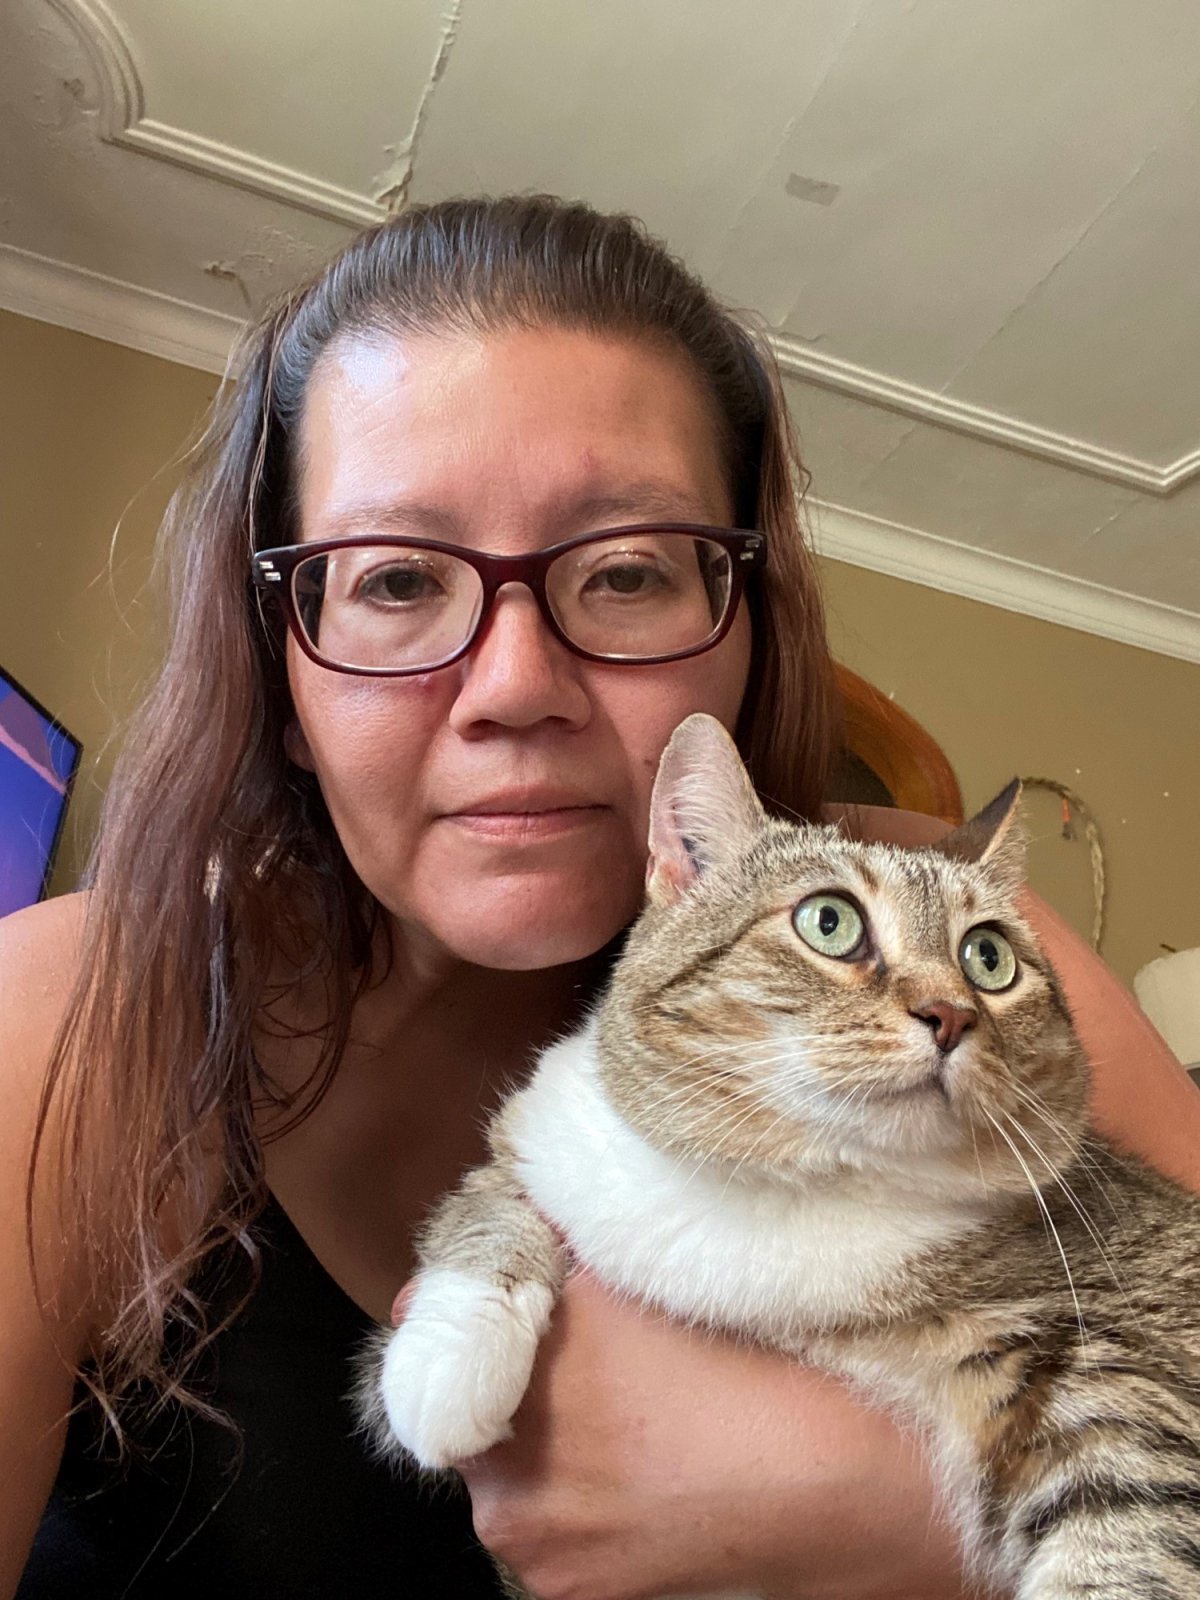 Winnipegger Michelle Bombay and her long-lost cat, Eva. Eva was returned to Bombay last month after running away from home nearly nine years ago.